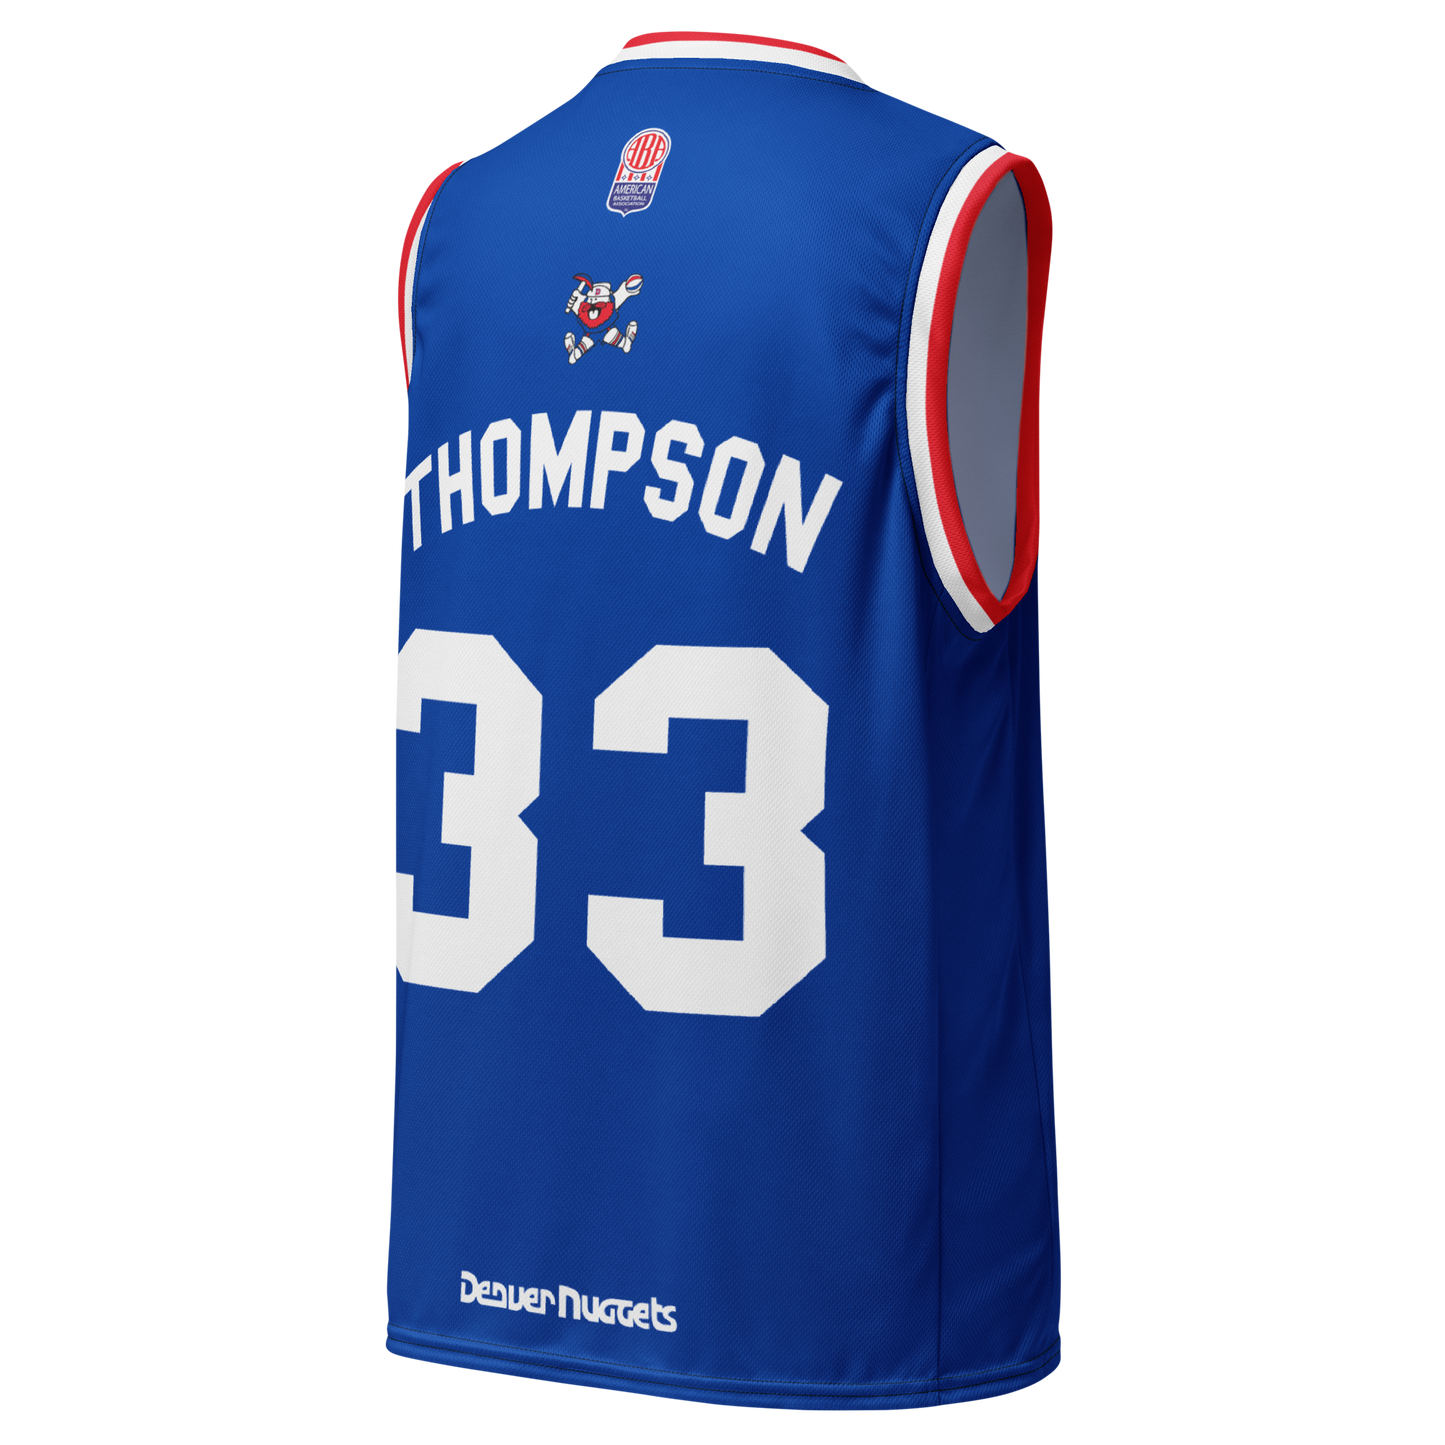 Introducing the "ABA Legends: David Thompson #33 Retro Denver Nuggets Jersey"!